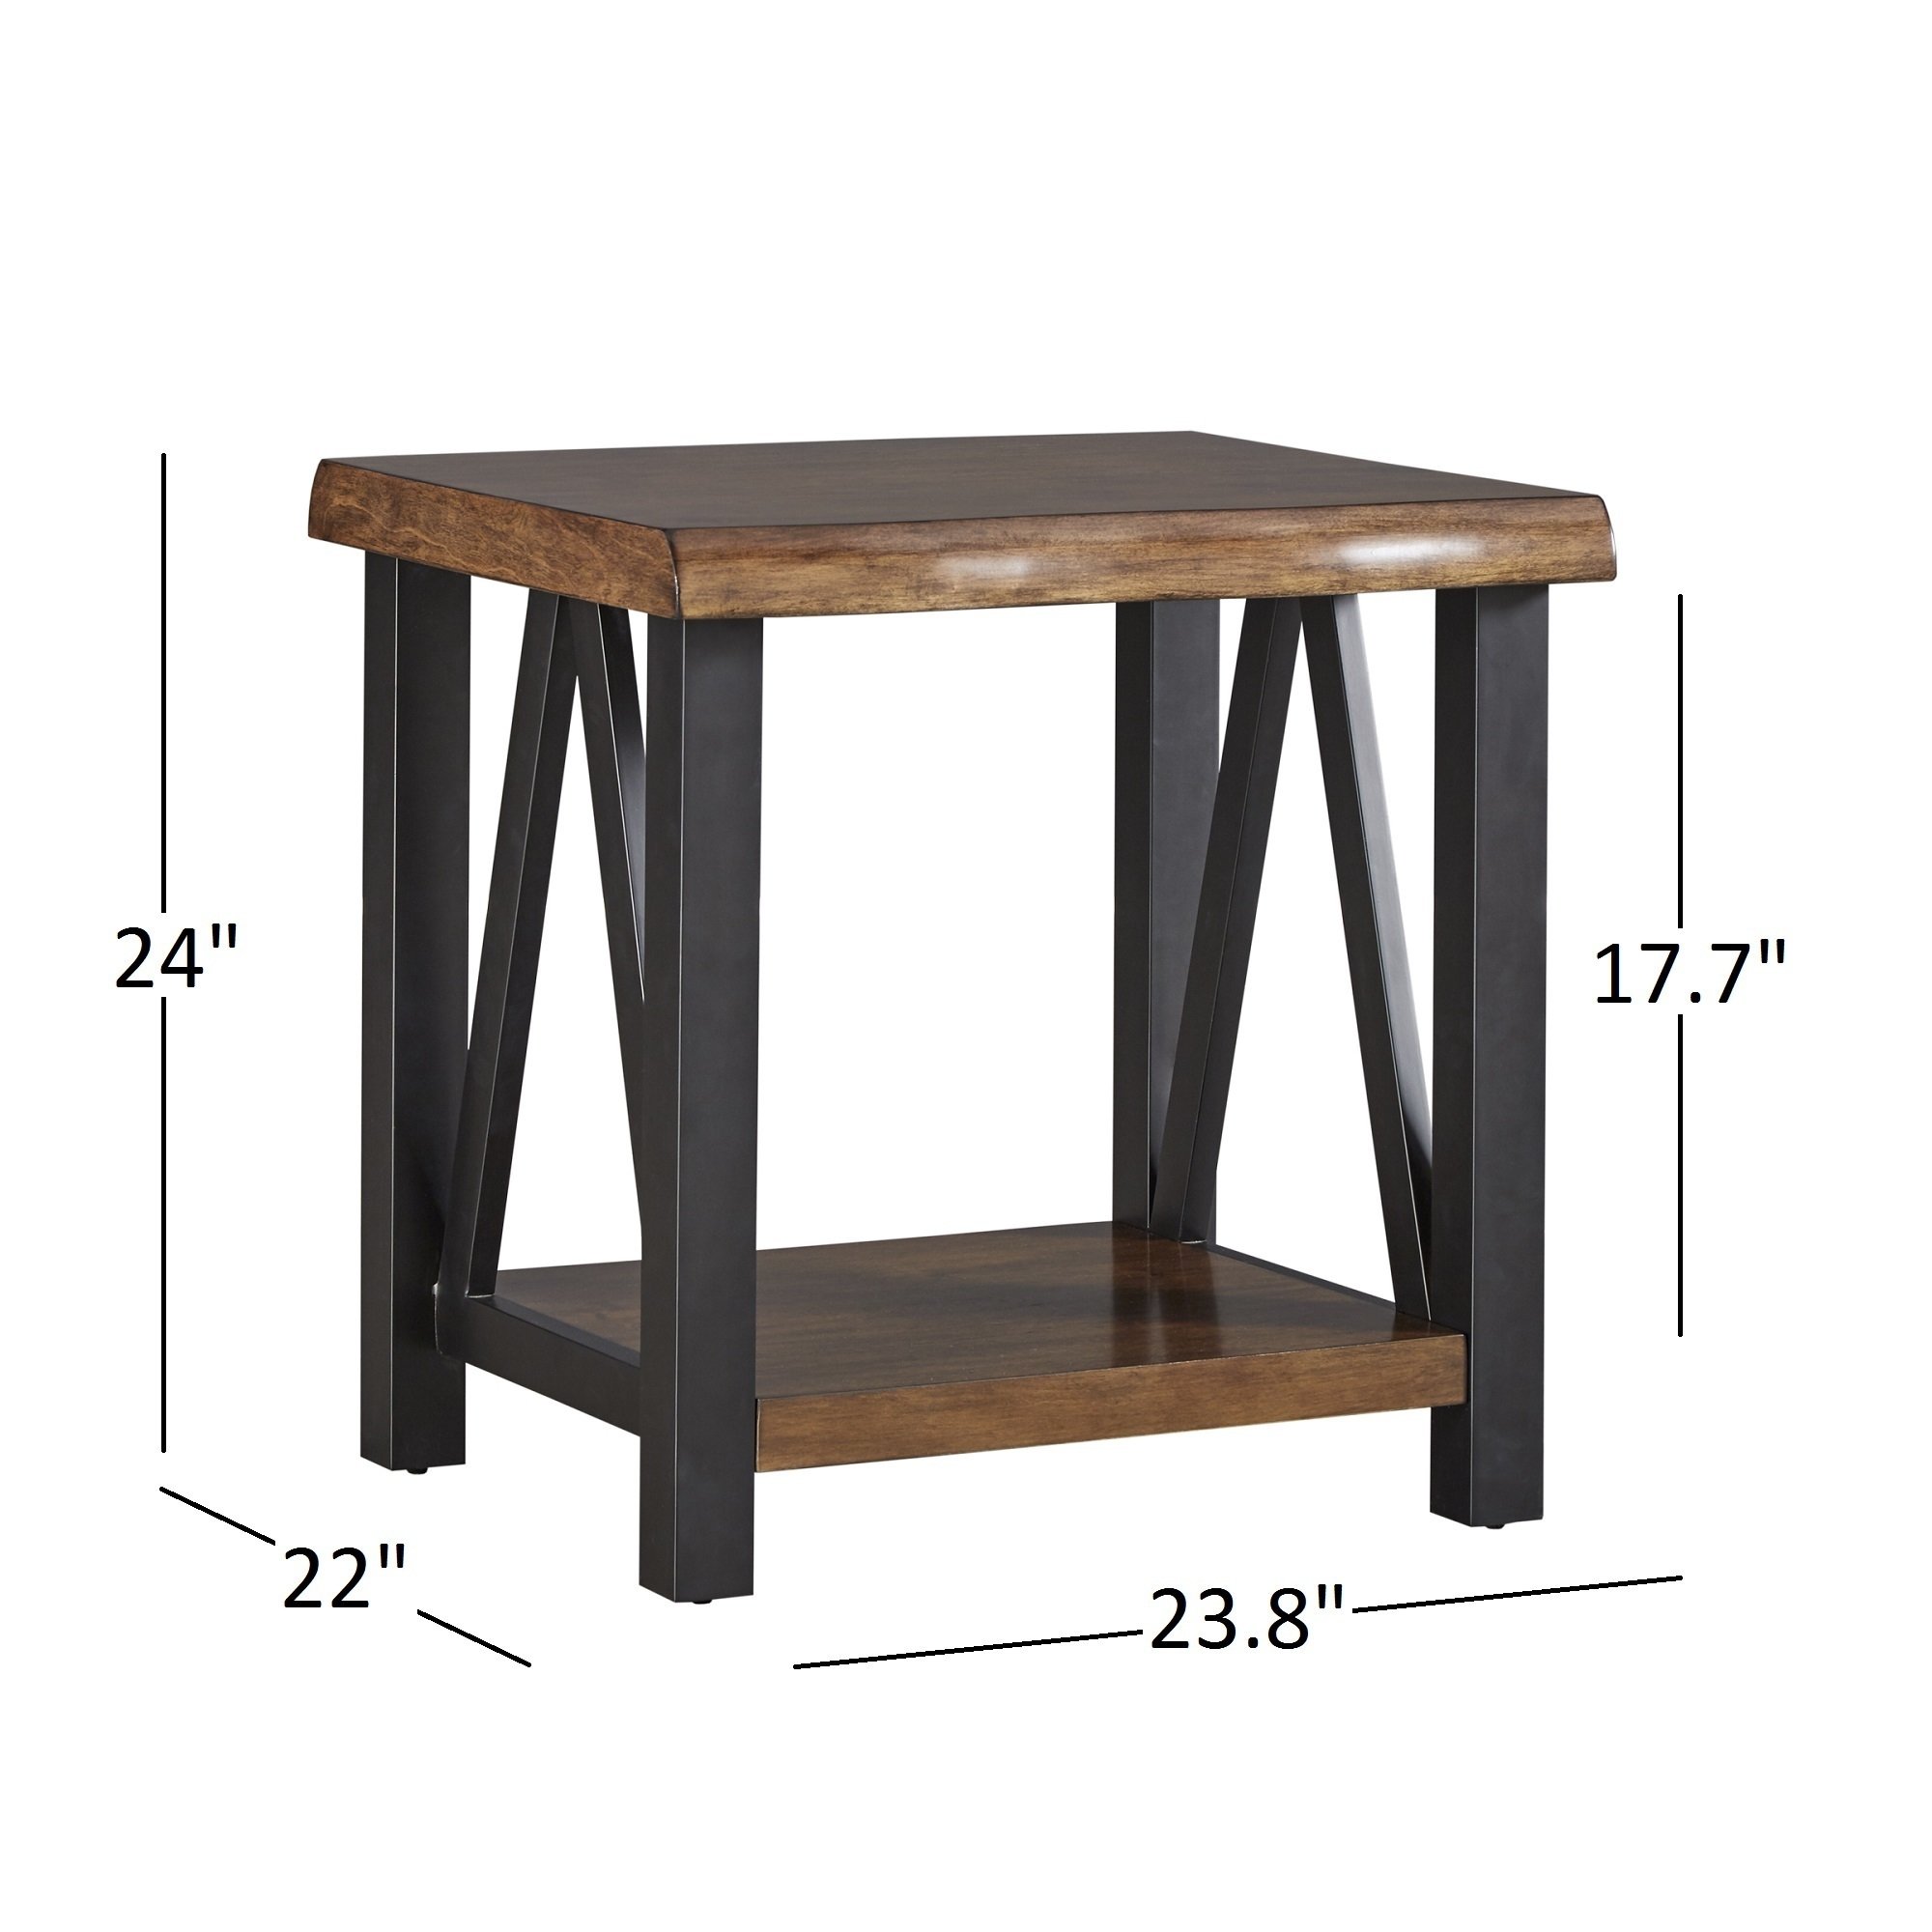 banyan live edge wood and metal accent tables inspire artisan furniture free shipping today patio occasional small chest cool umbrellas cordless battery lamp low table kidney bean